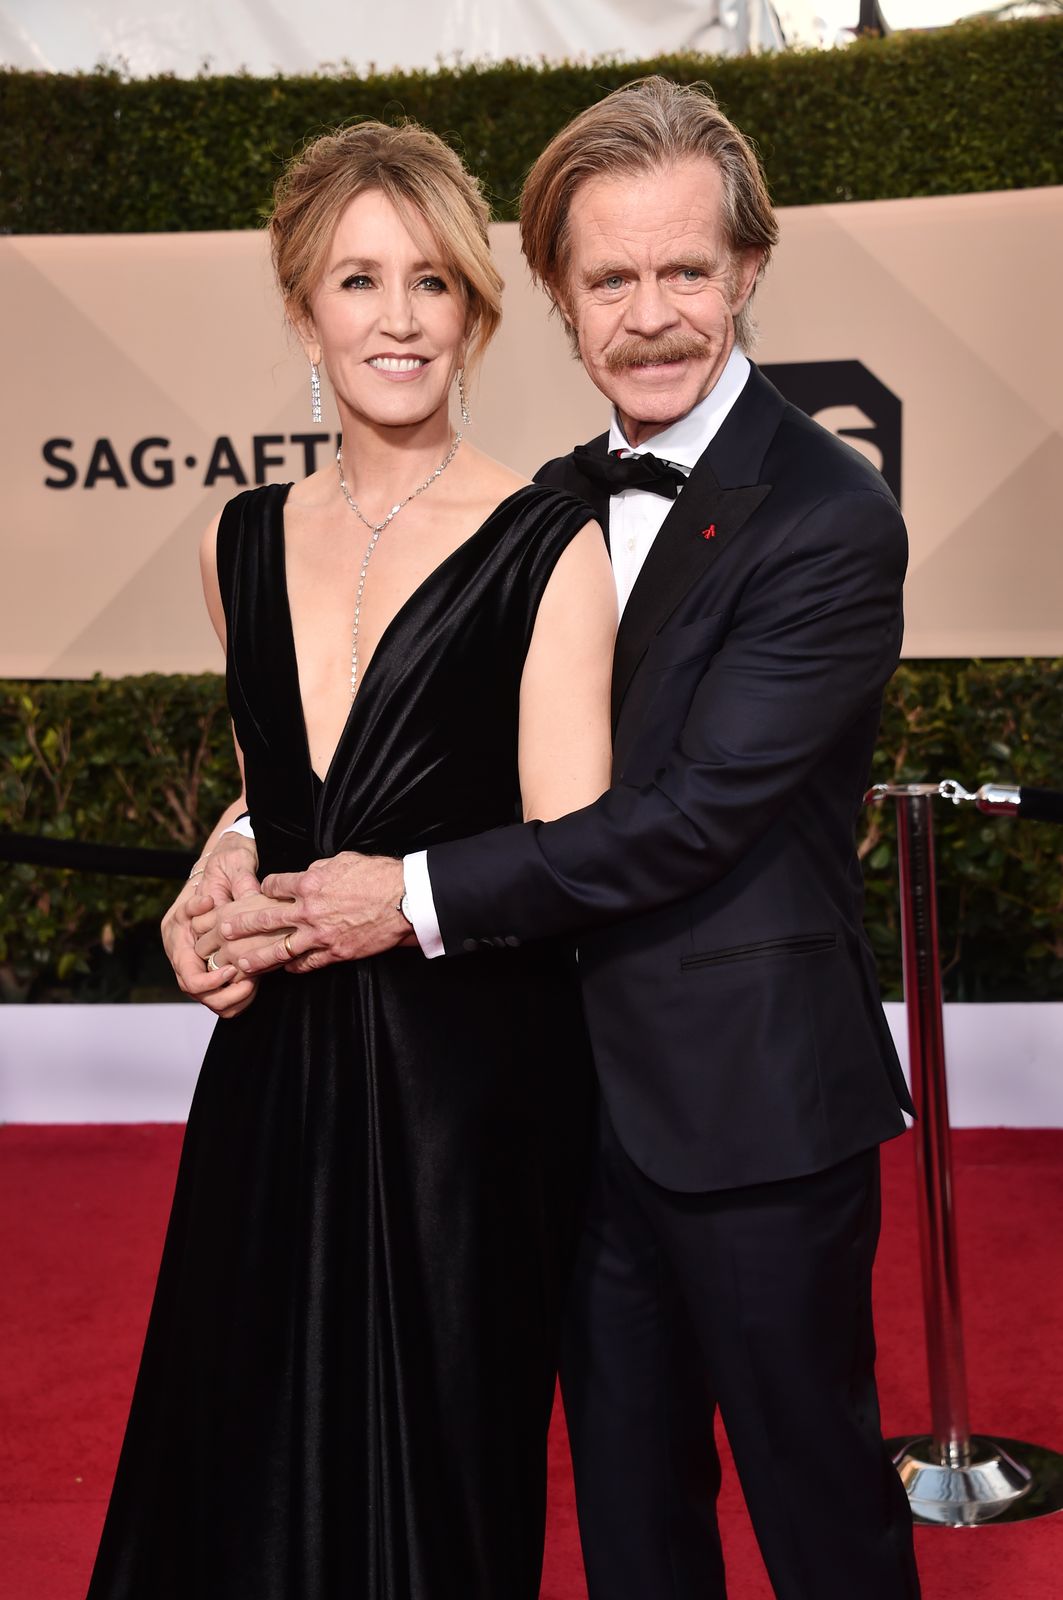 Felicity Huffman and William H. Macy at the 24th Annual Screen Actors Guild Awards in Los Angeles on January 21, 2018. | Photo: Getty Images